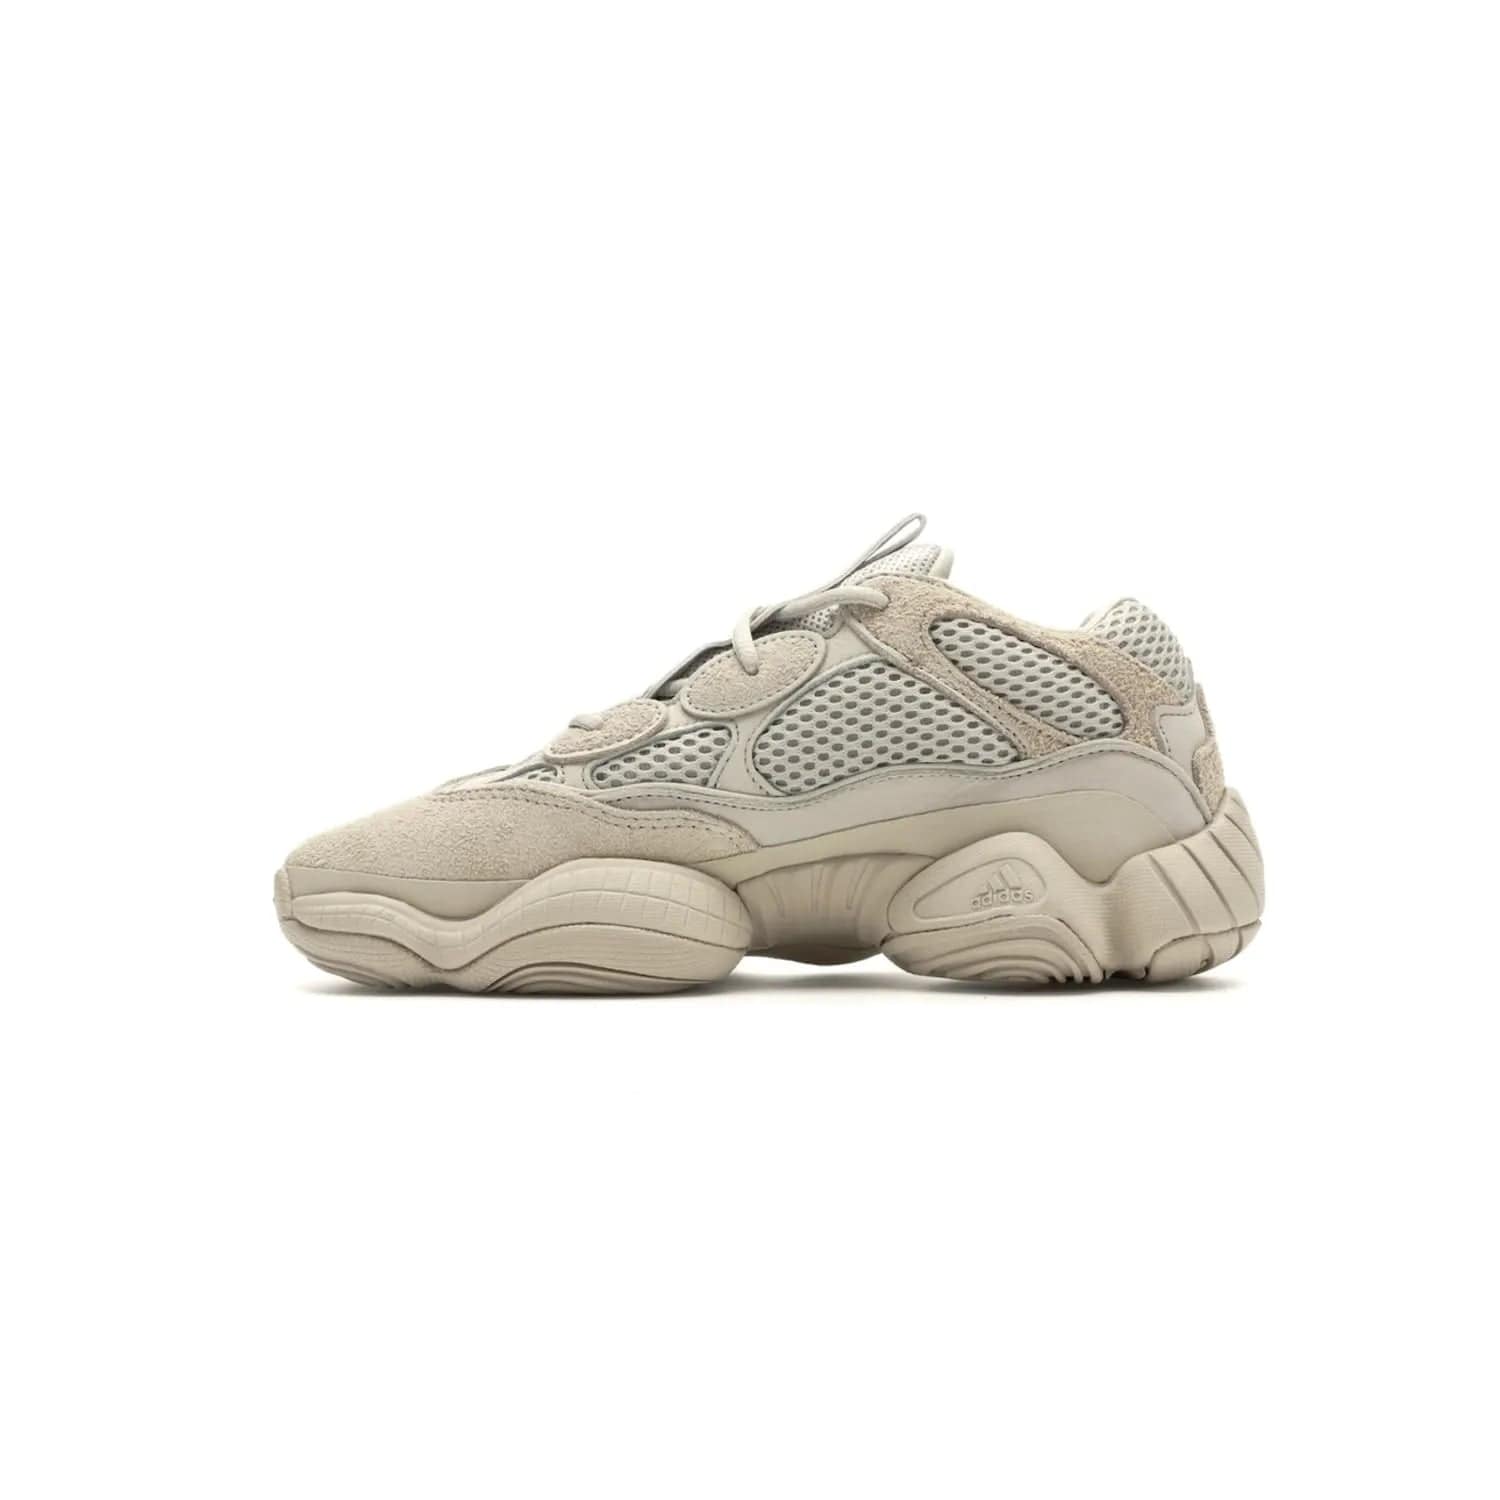 adidas Yeezy 500 Blush - Image 19 - Only at www.BallersClubKickz.com - Step up your sneaker game with the Adidas Yeezy 500 Blush. Monochromatic pale pink palette, hiking-inspired suede/mesh construction, plus adiPRENE sole for comfort and performance. Get the Adidas Yeezy 500 and experience true style and comfort.